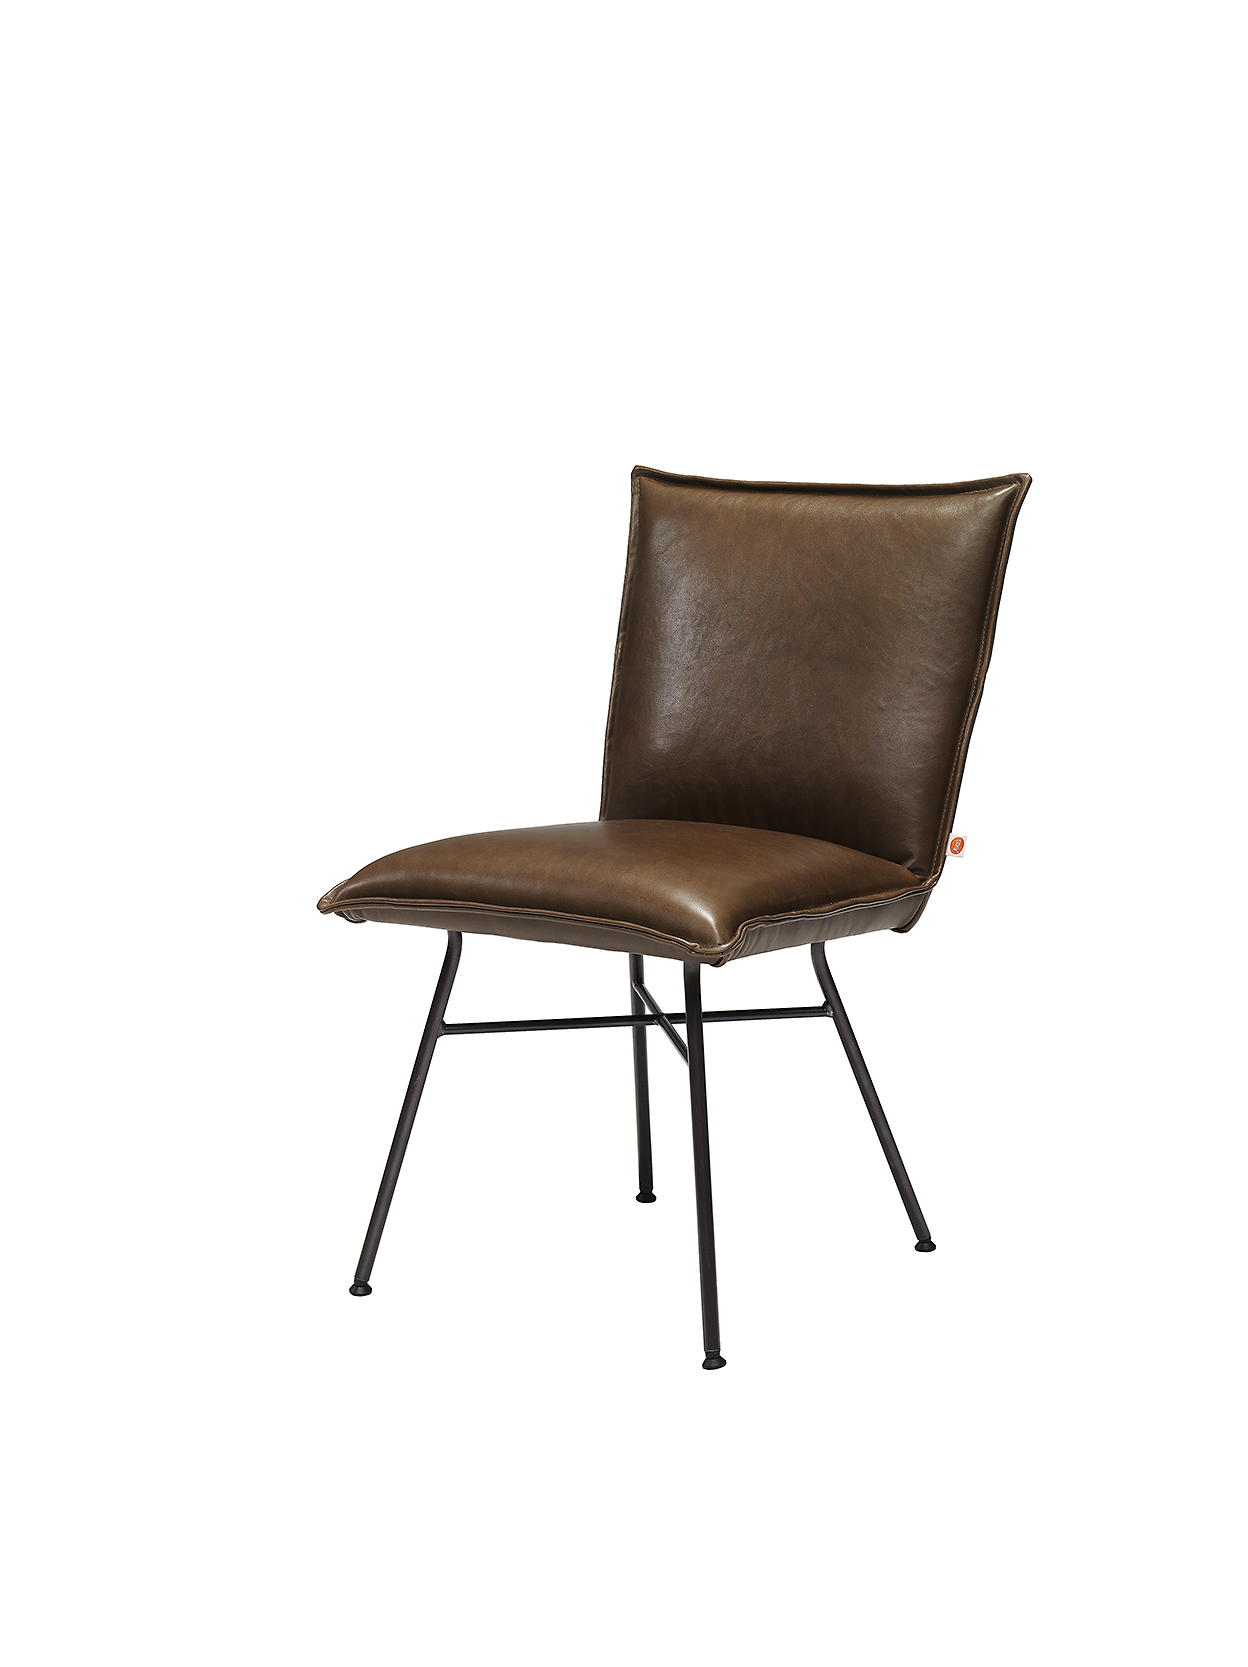 Sanne Chair Without Arm Luxor Fango Pers LR ZS 8720153744614